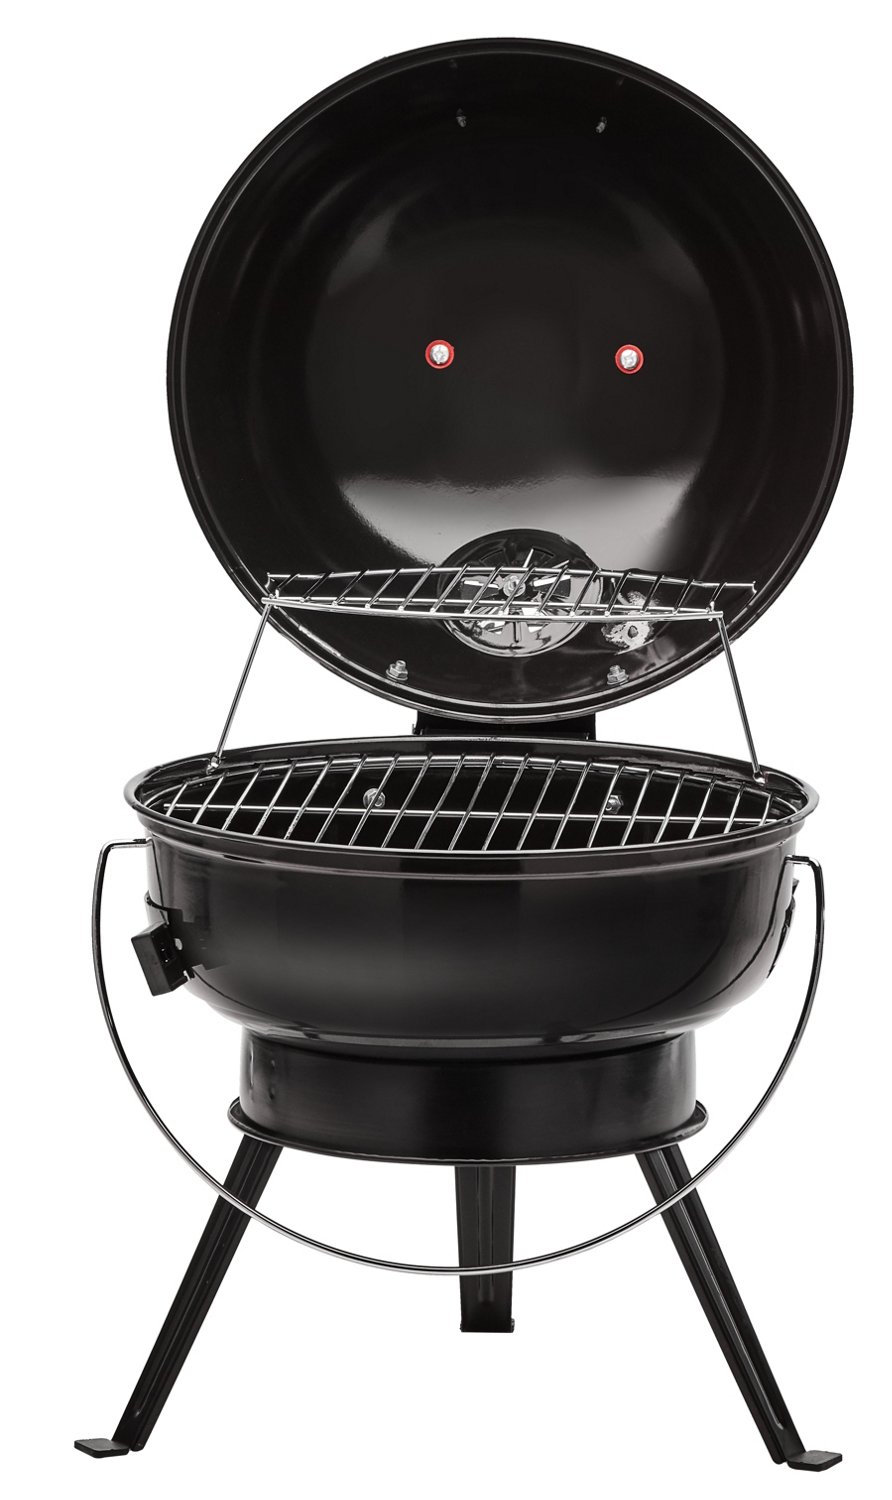 Kitchen Academy 22 inch Kettle Enamel Charcoal Patio Grill with Built-in Thermometer, Size: Metal - Assembly Required